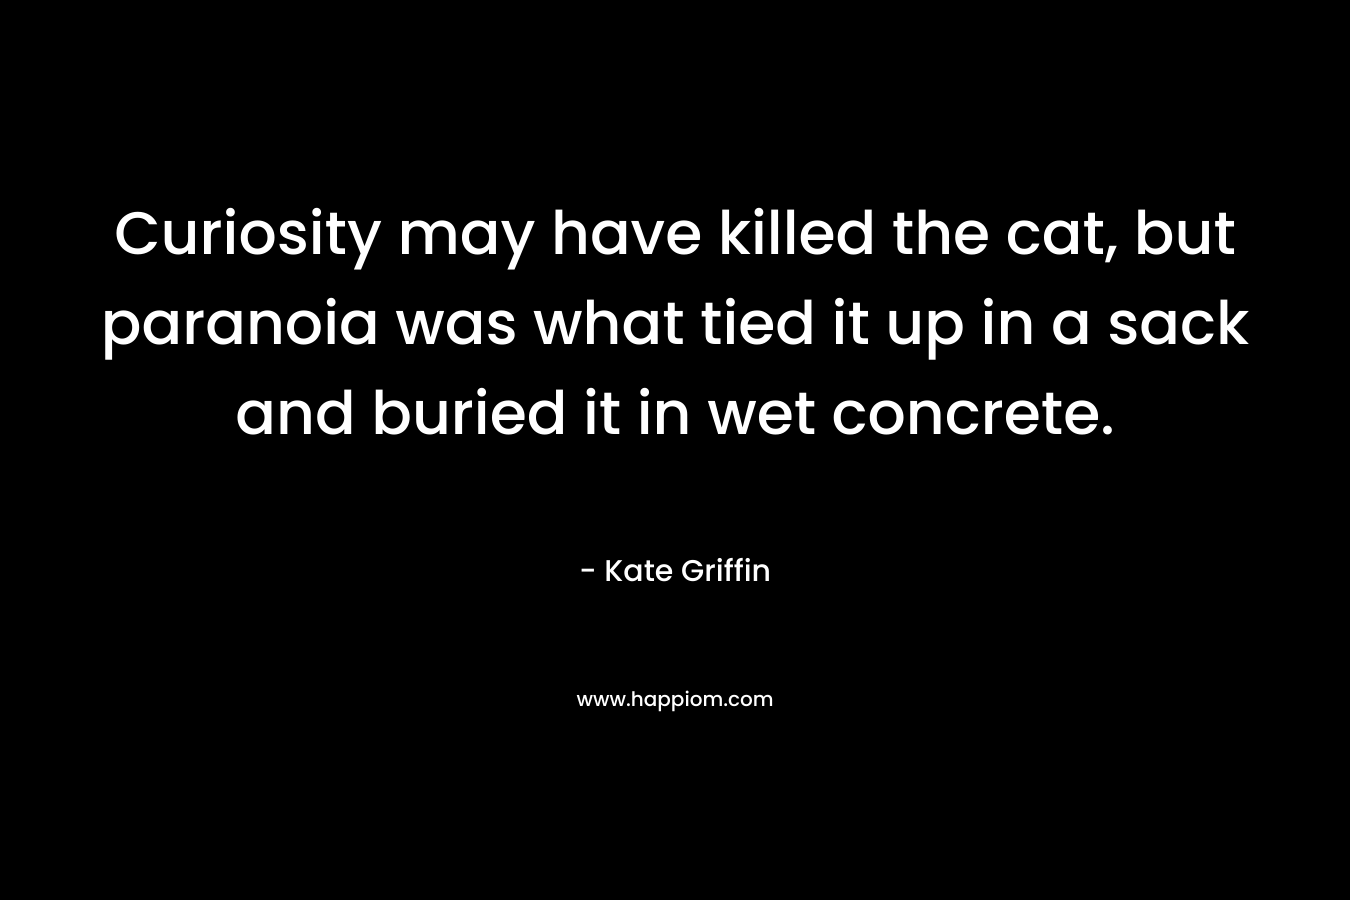 Curiosity may have killed the cat, but paranoia was what tied it up in a sack and buried it in wet concrete. – Kate Griffin